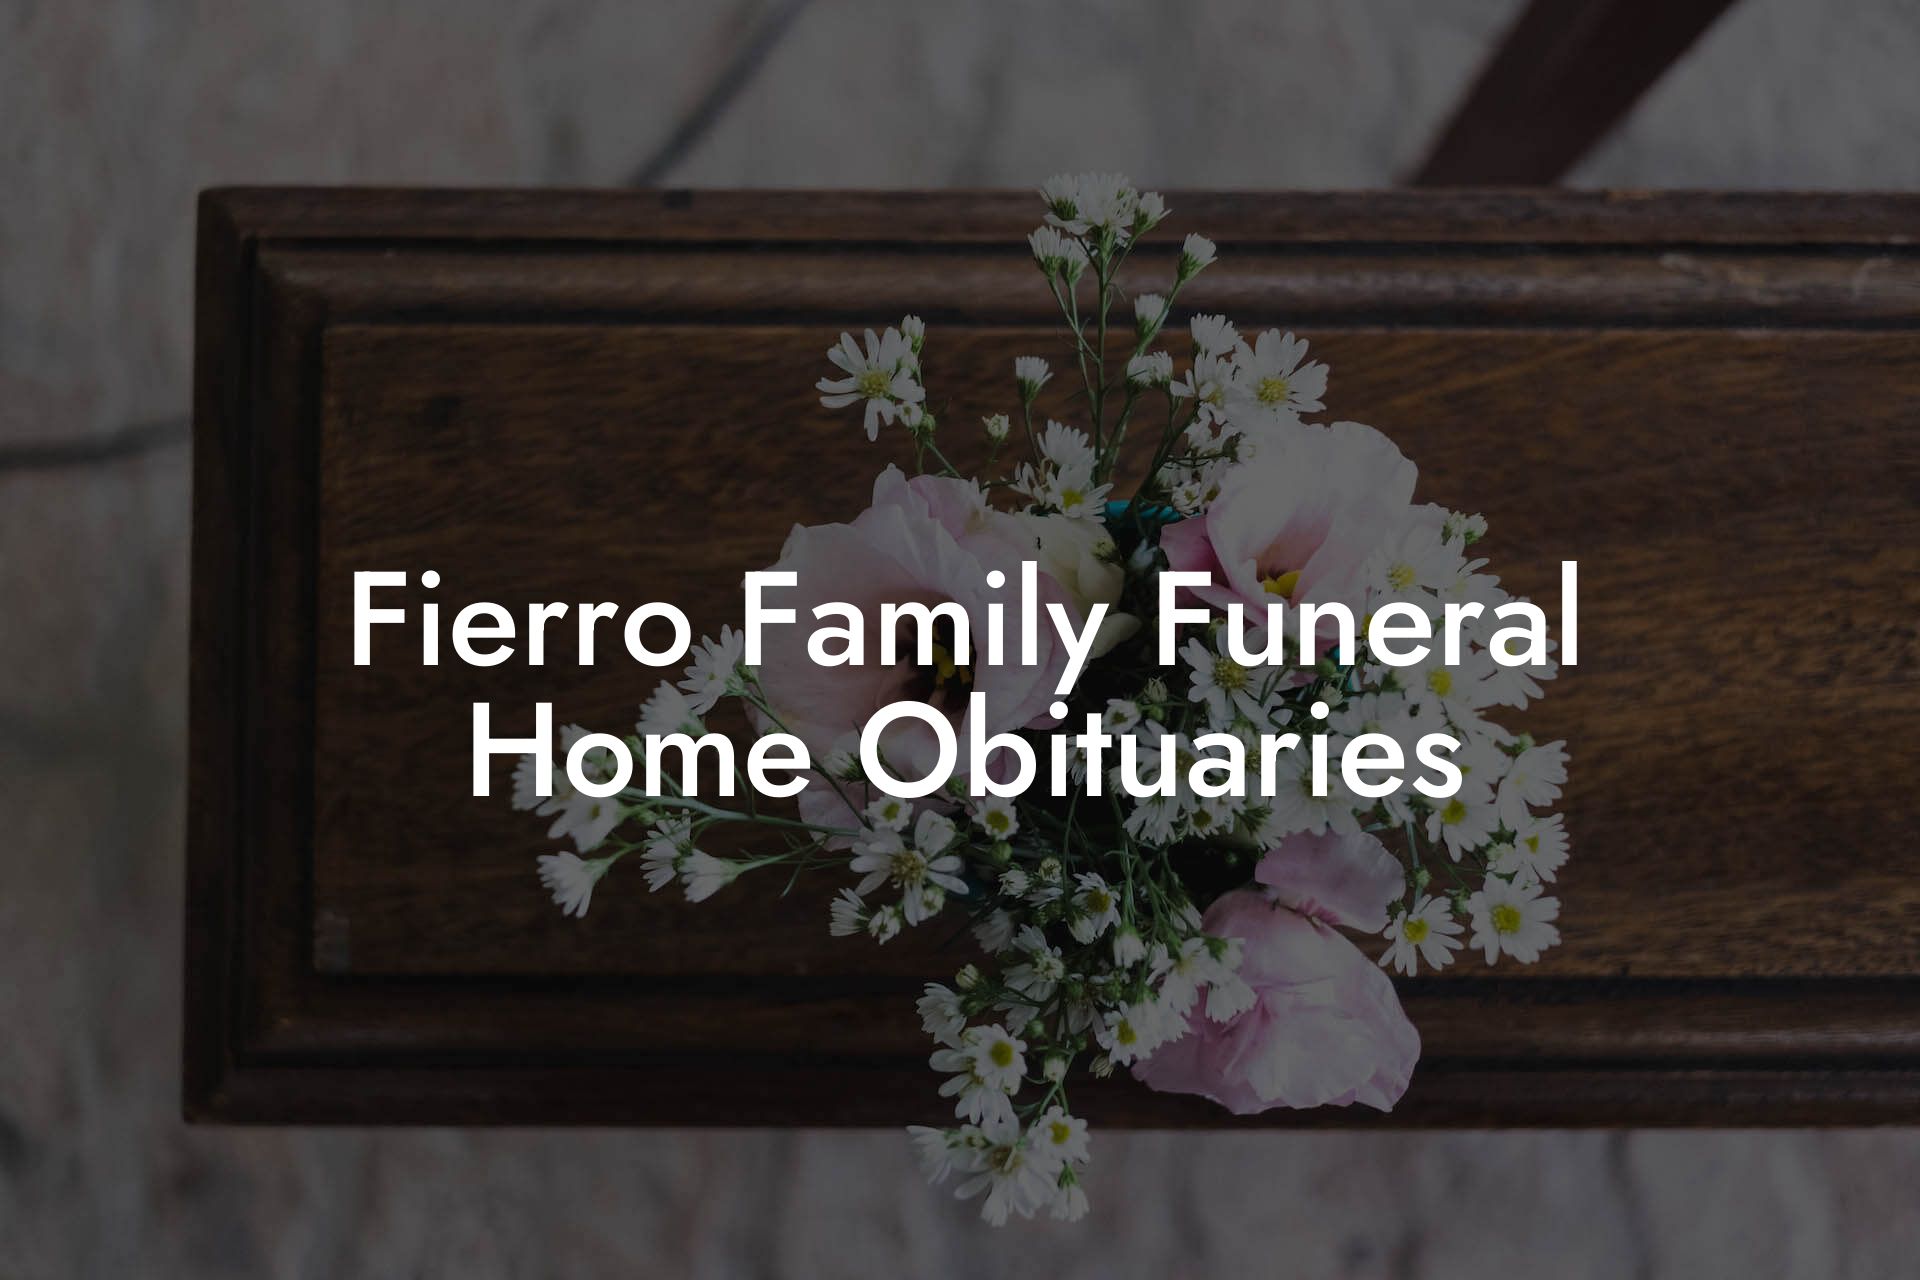 Fierro Family Funeral Home Obituaries